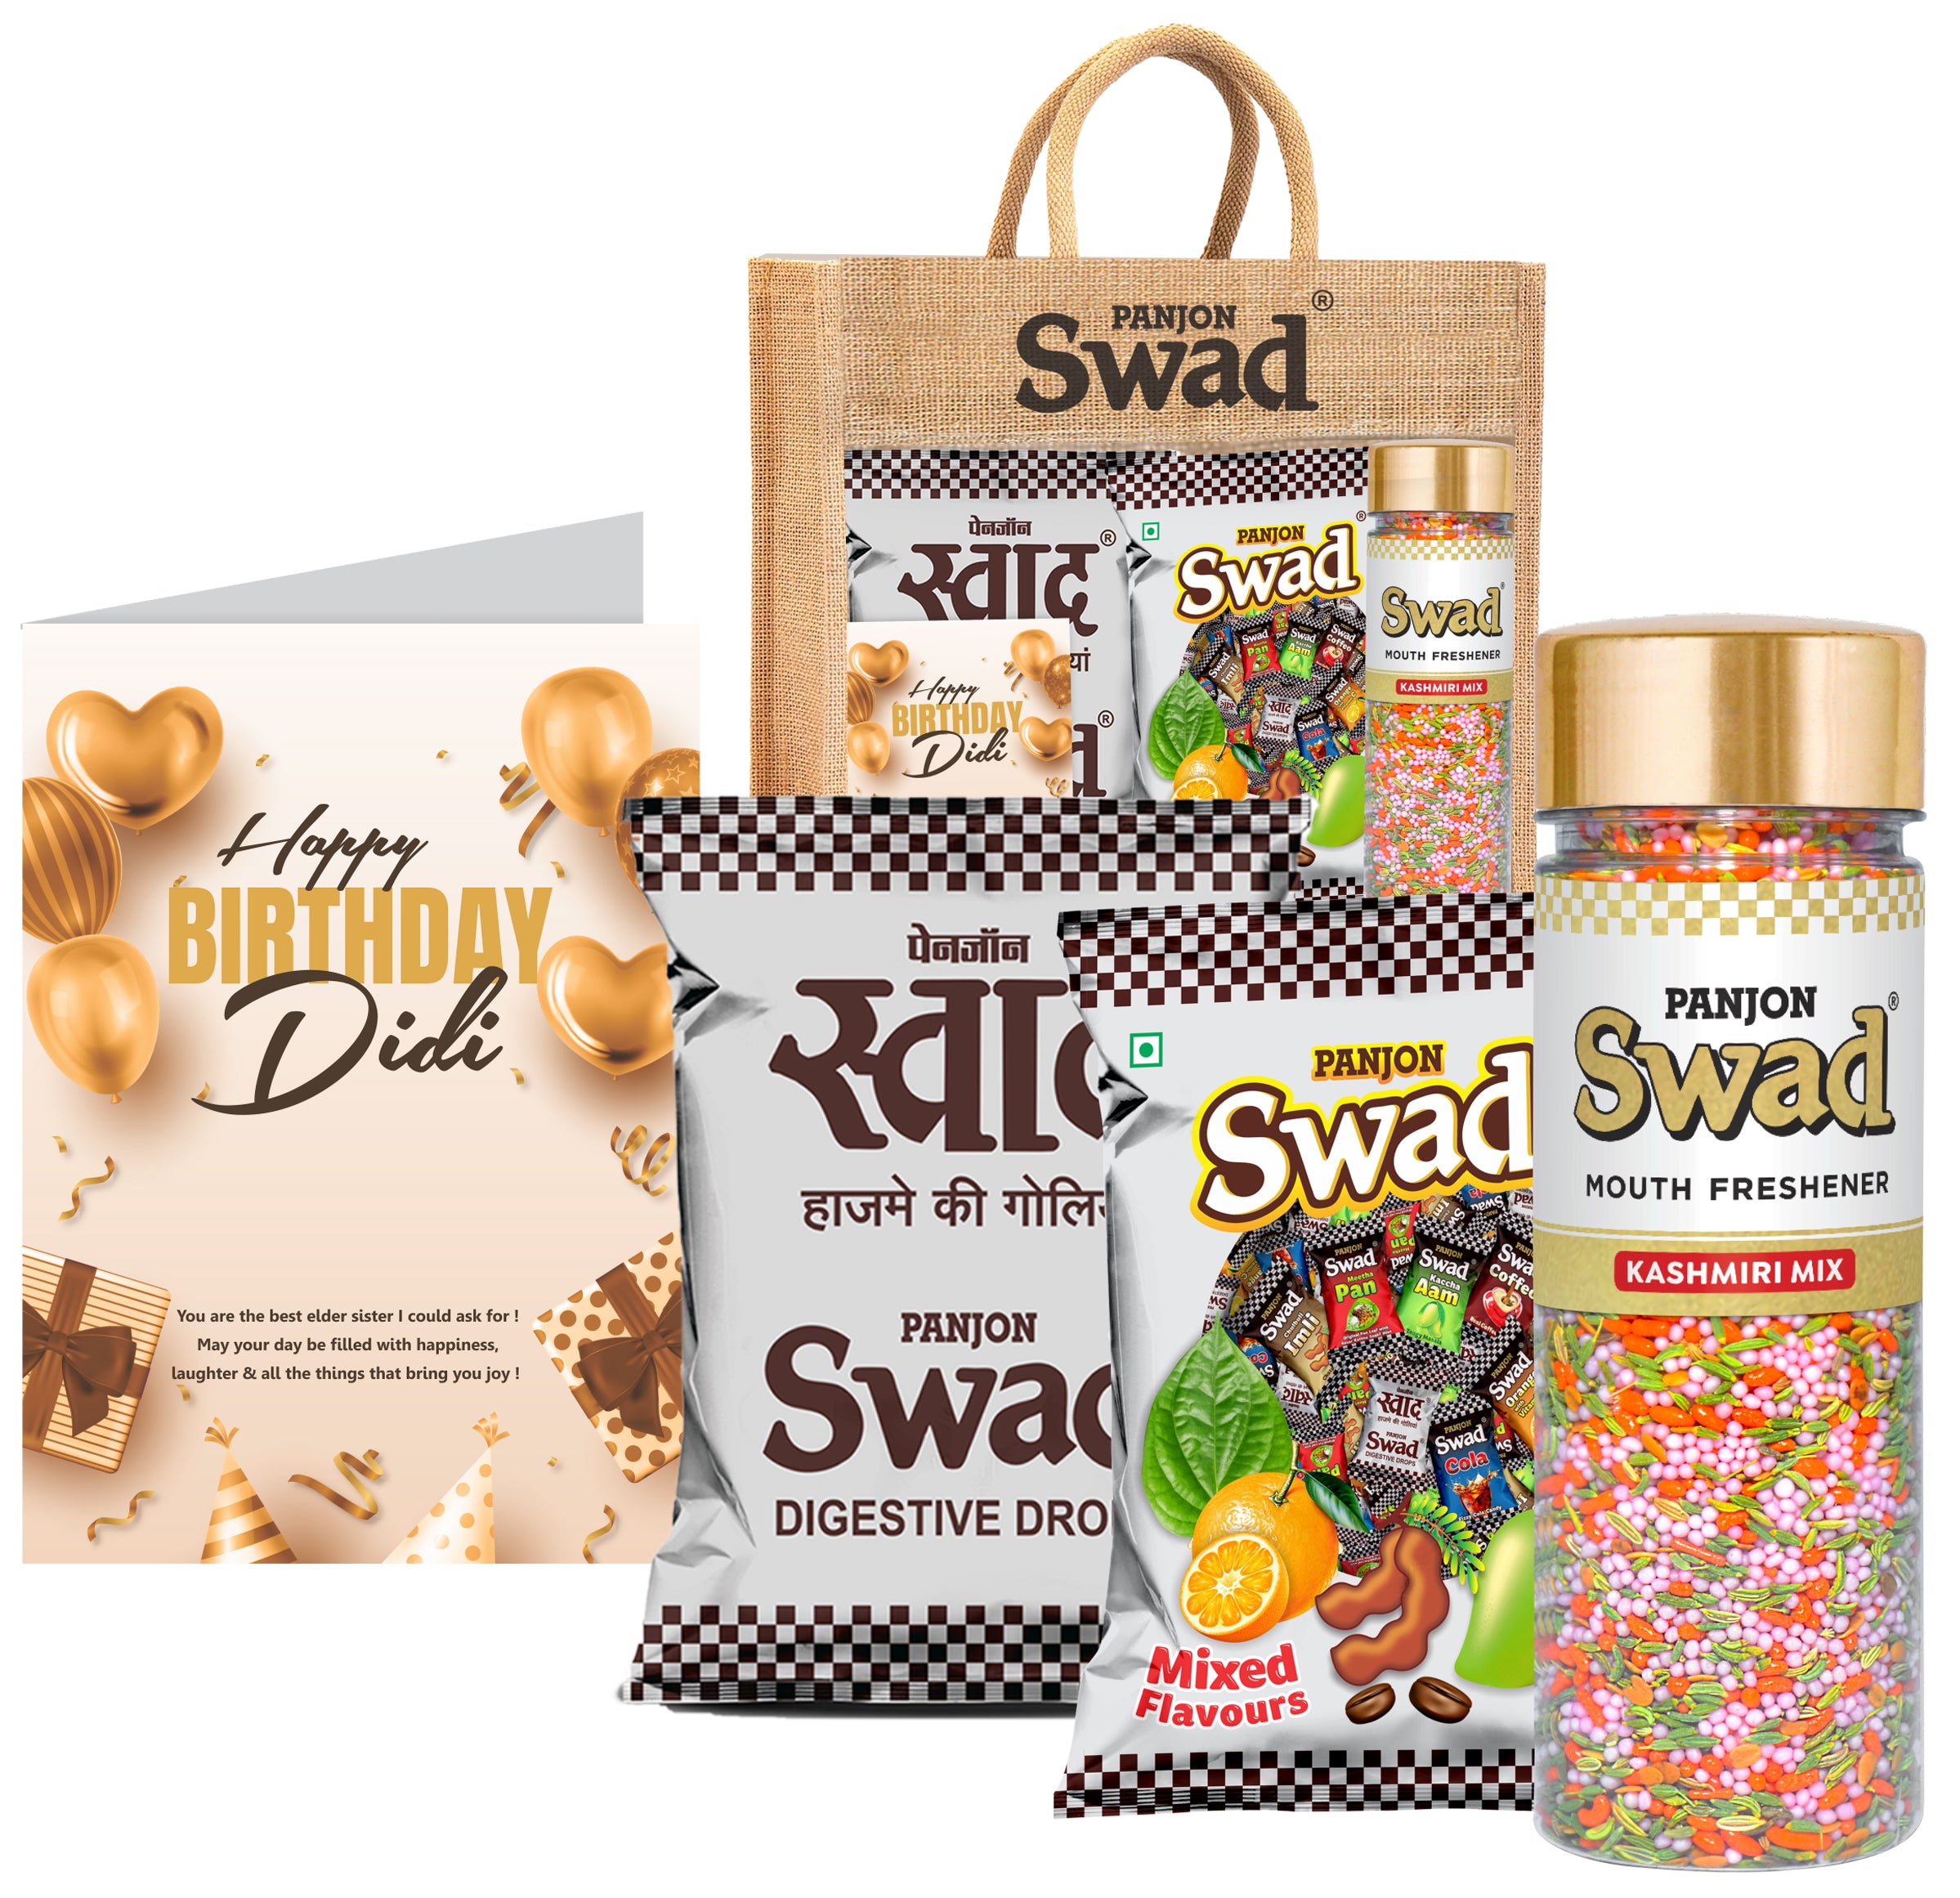 Swad Happy Birthday Didi Elder sister Gift with Card (25 Swad Candy, 25 Mixed Toffee, Kashmiri Mix Mukhwas) in Jute Bag